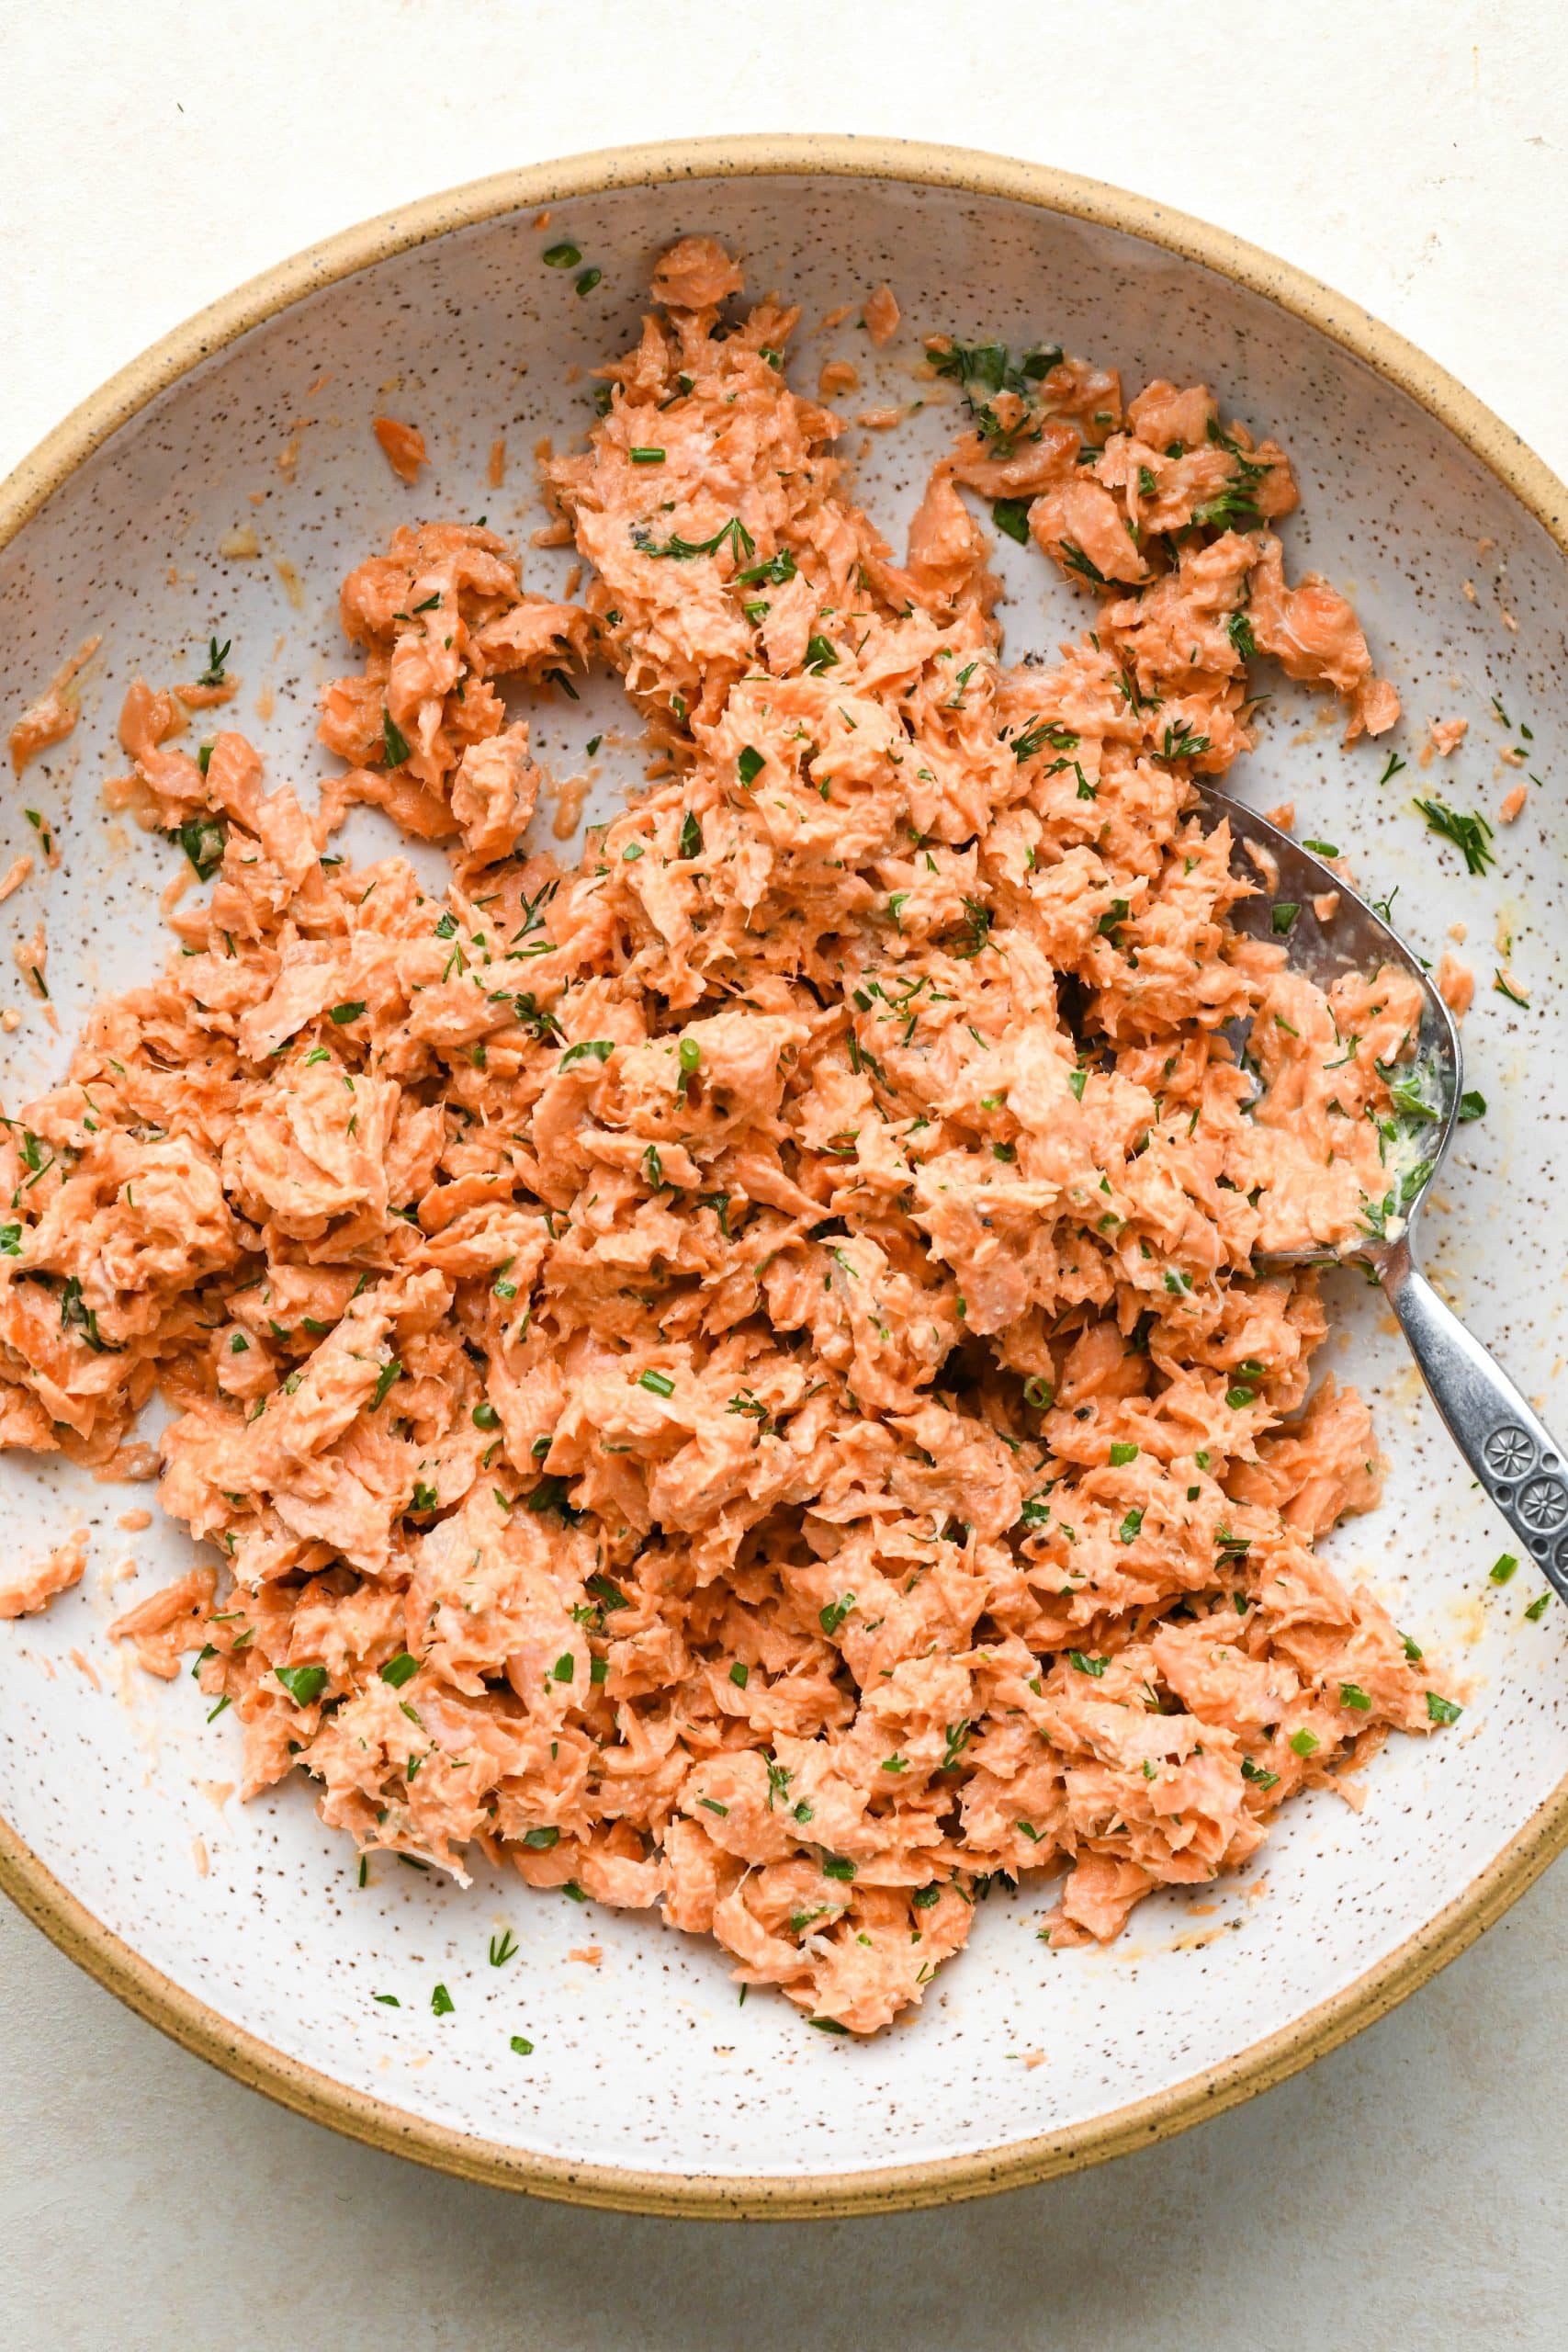 How to make Whole30 Salmon Cakes: All ingredients for salmon cakes in a large bowl, after mixing.